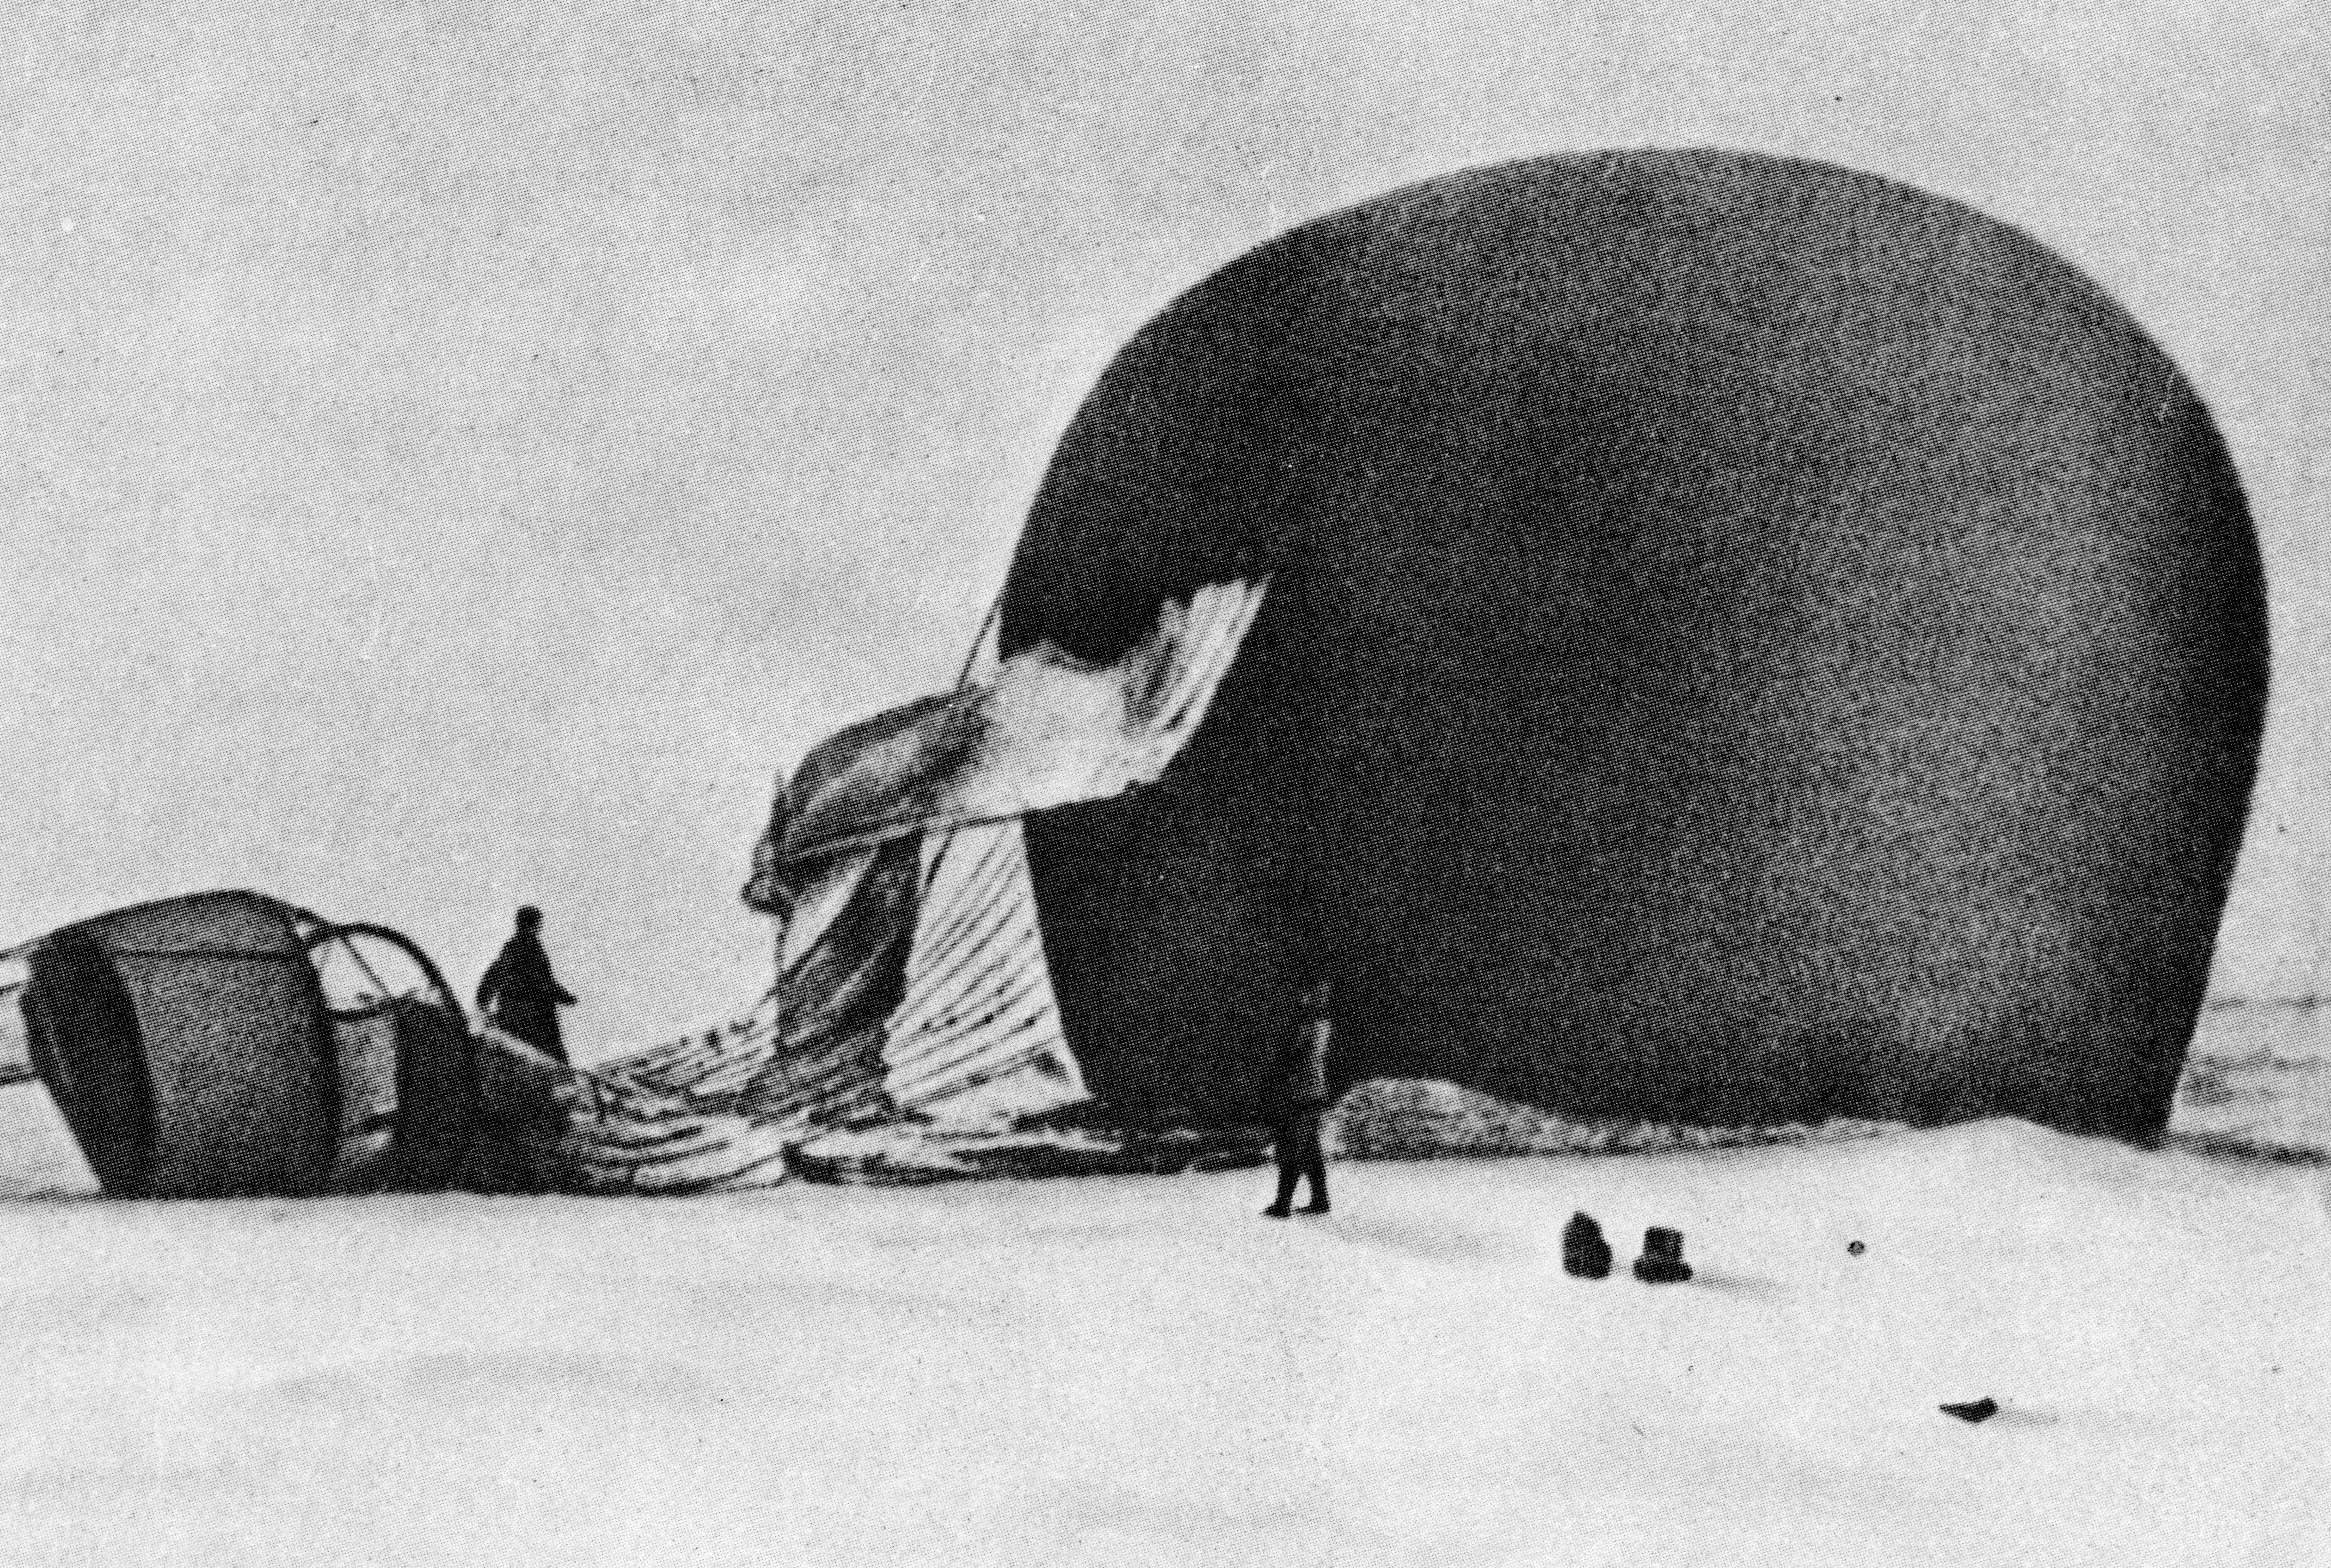 Andrée's balloon after its descent onto pack ice [Photograph]. (1897)